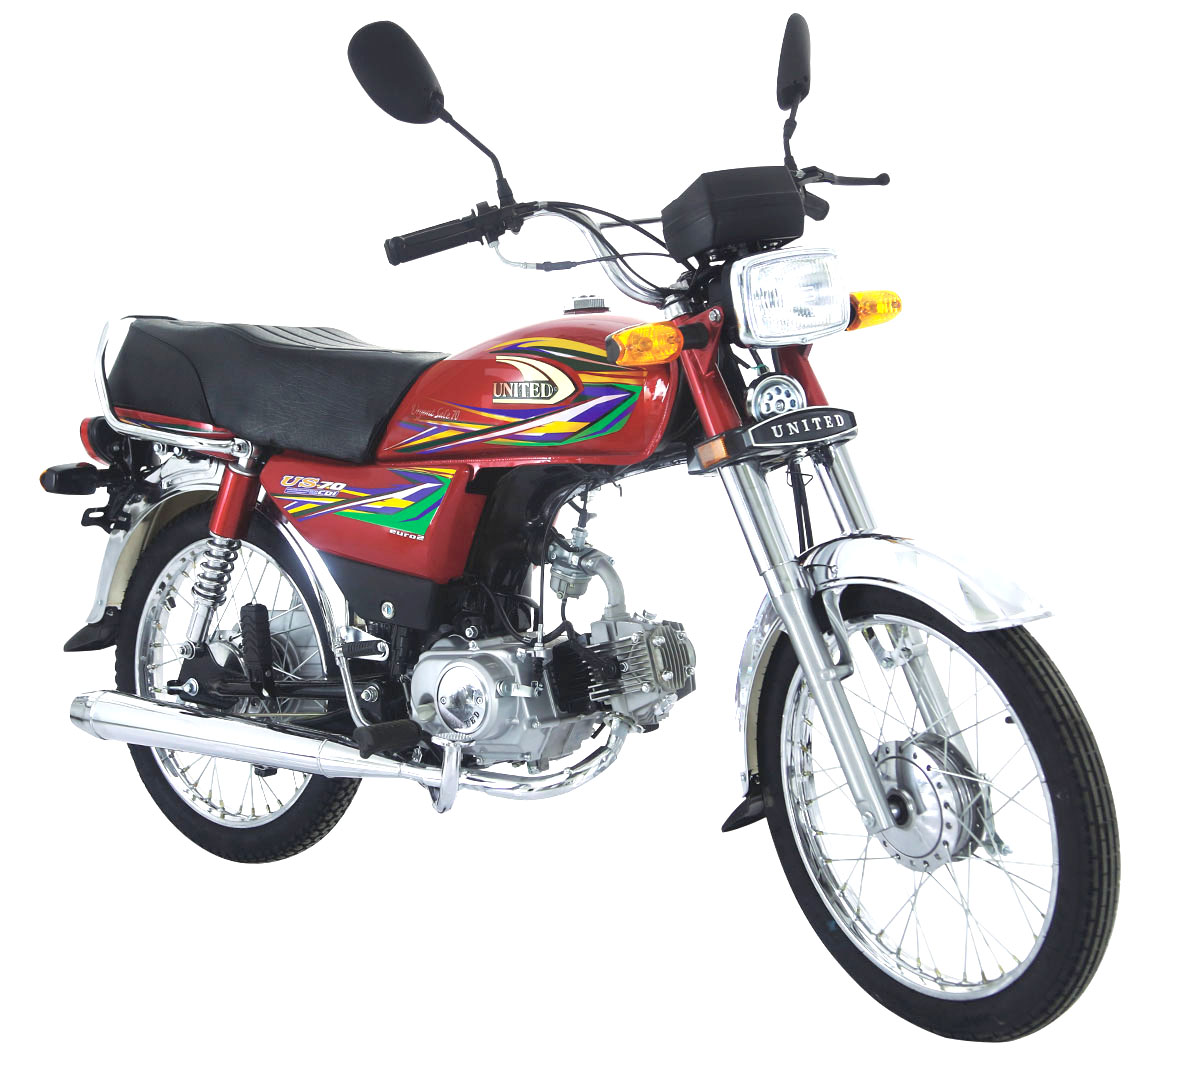 United Motorcycle 70cc price in Pakistan 2022